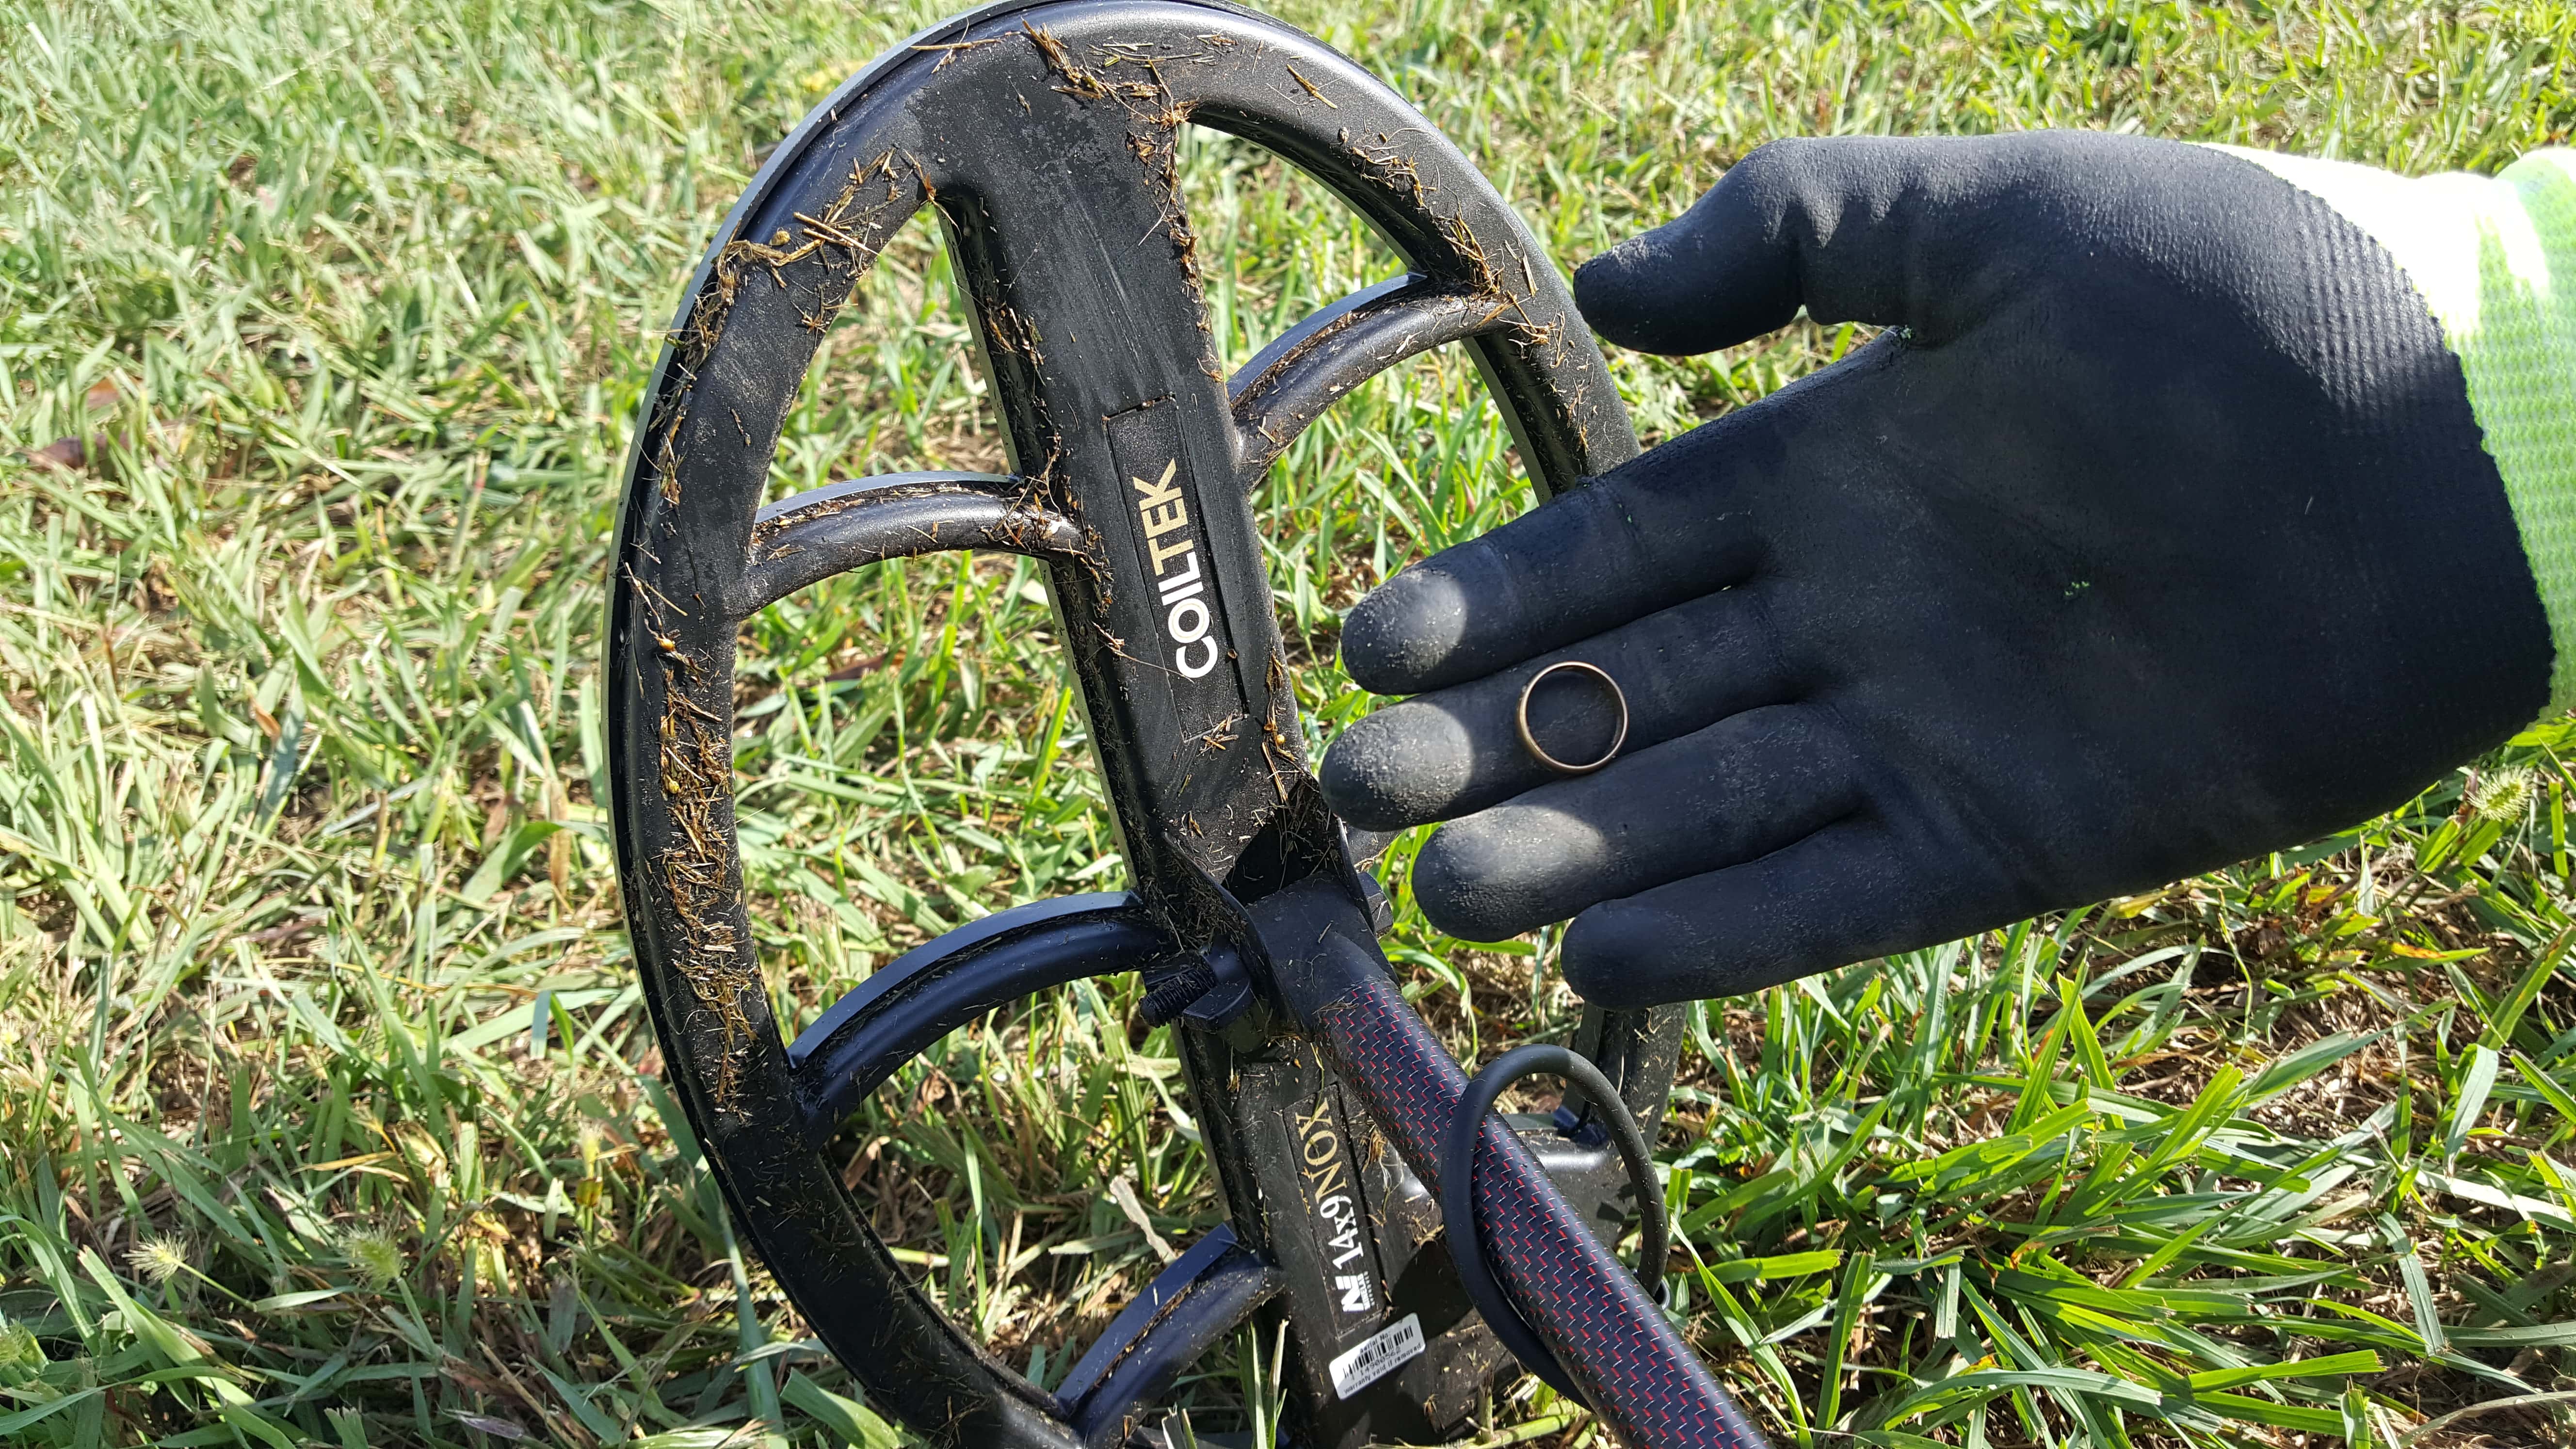 Gold Ring in Gloved Hand with Coiltek 14 x 9 Search Coil in the Background with Grassy Lawn and Grass on Coil